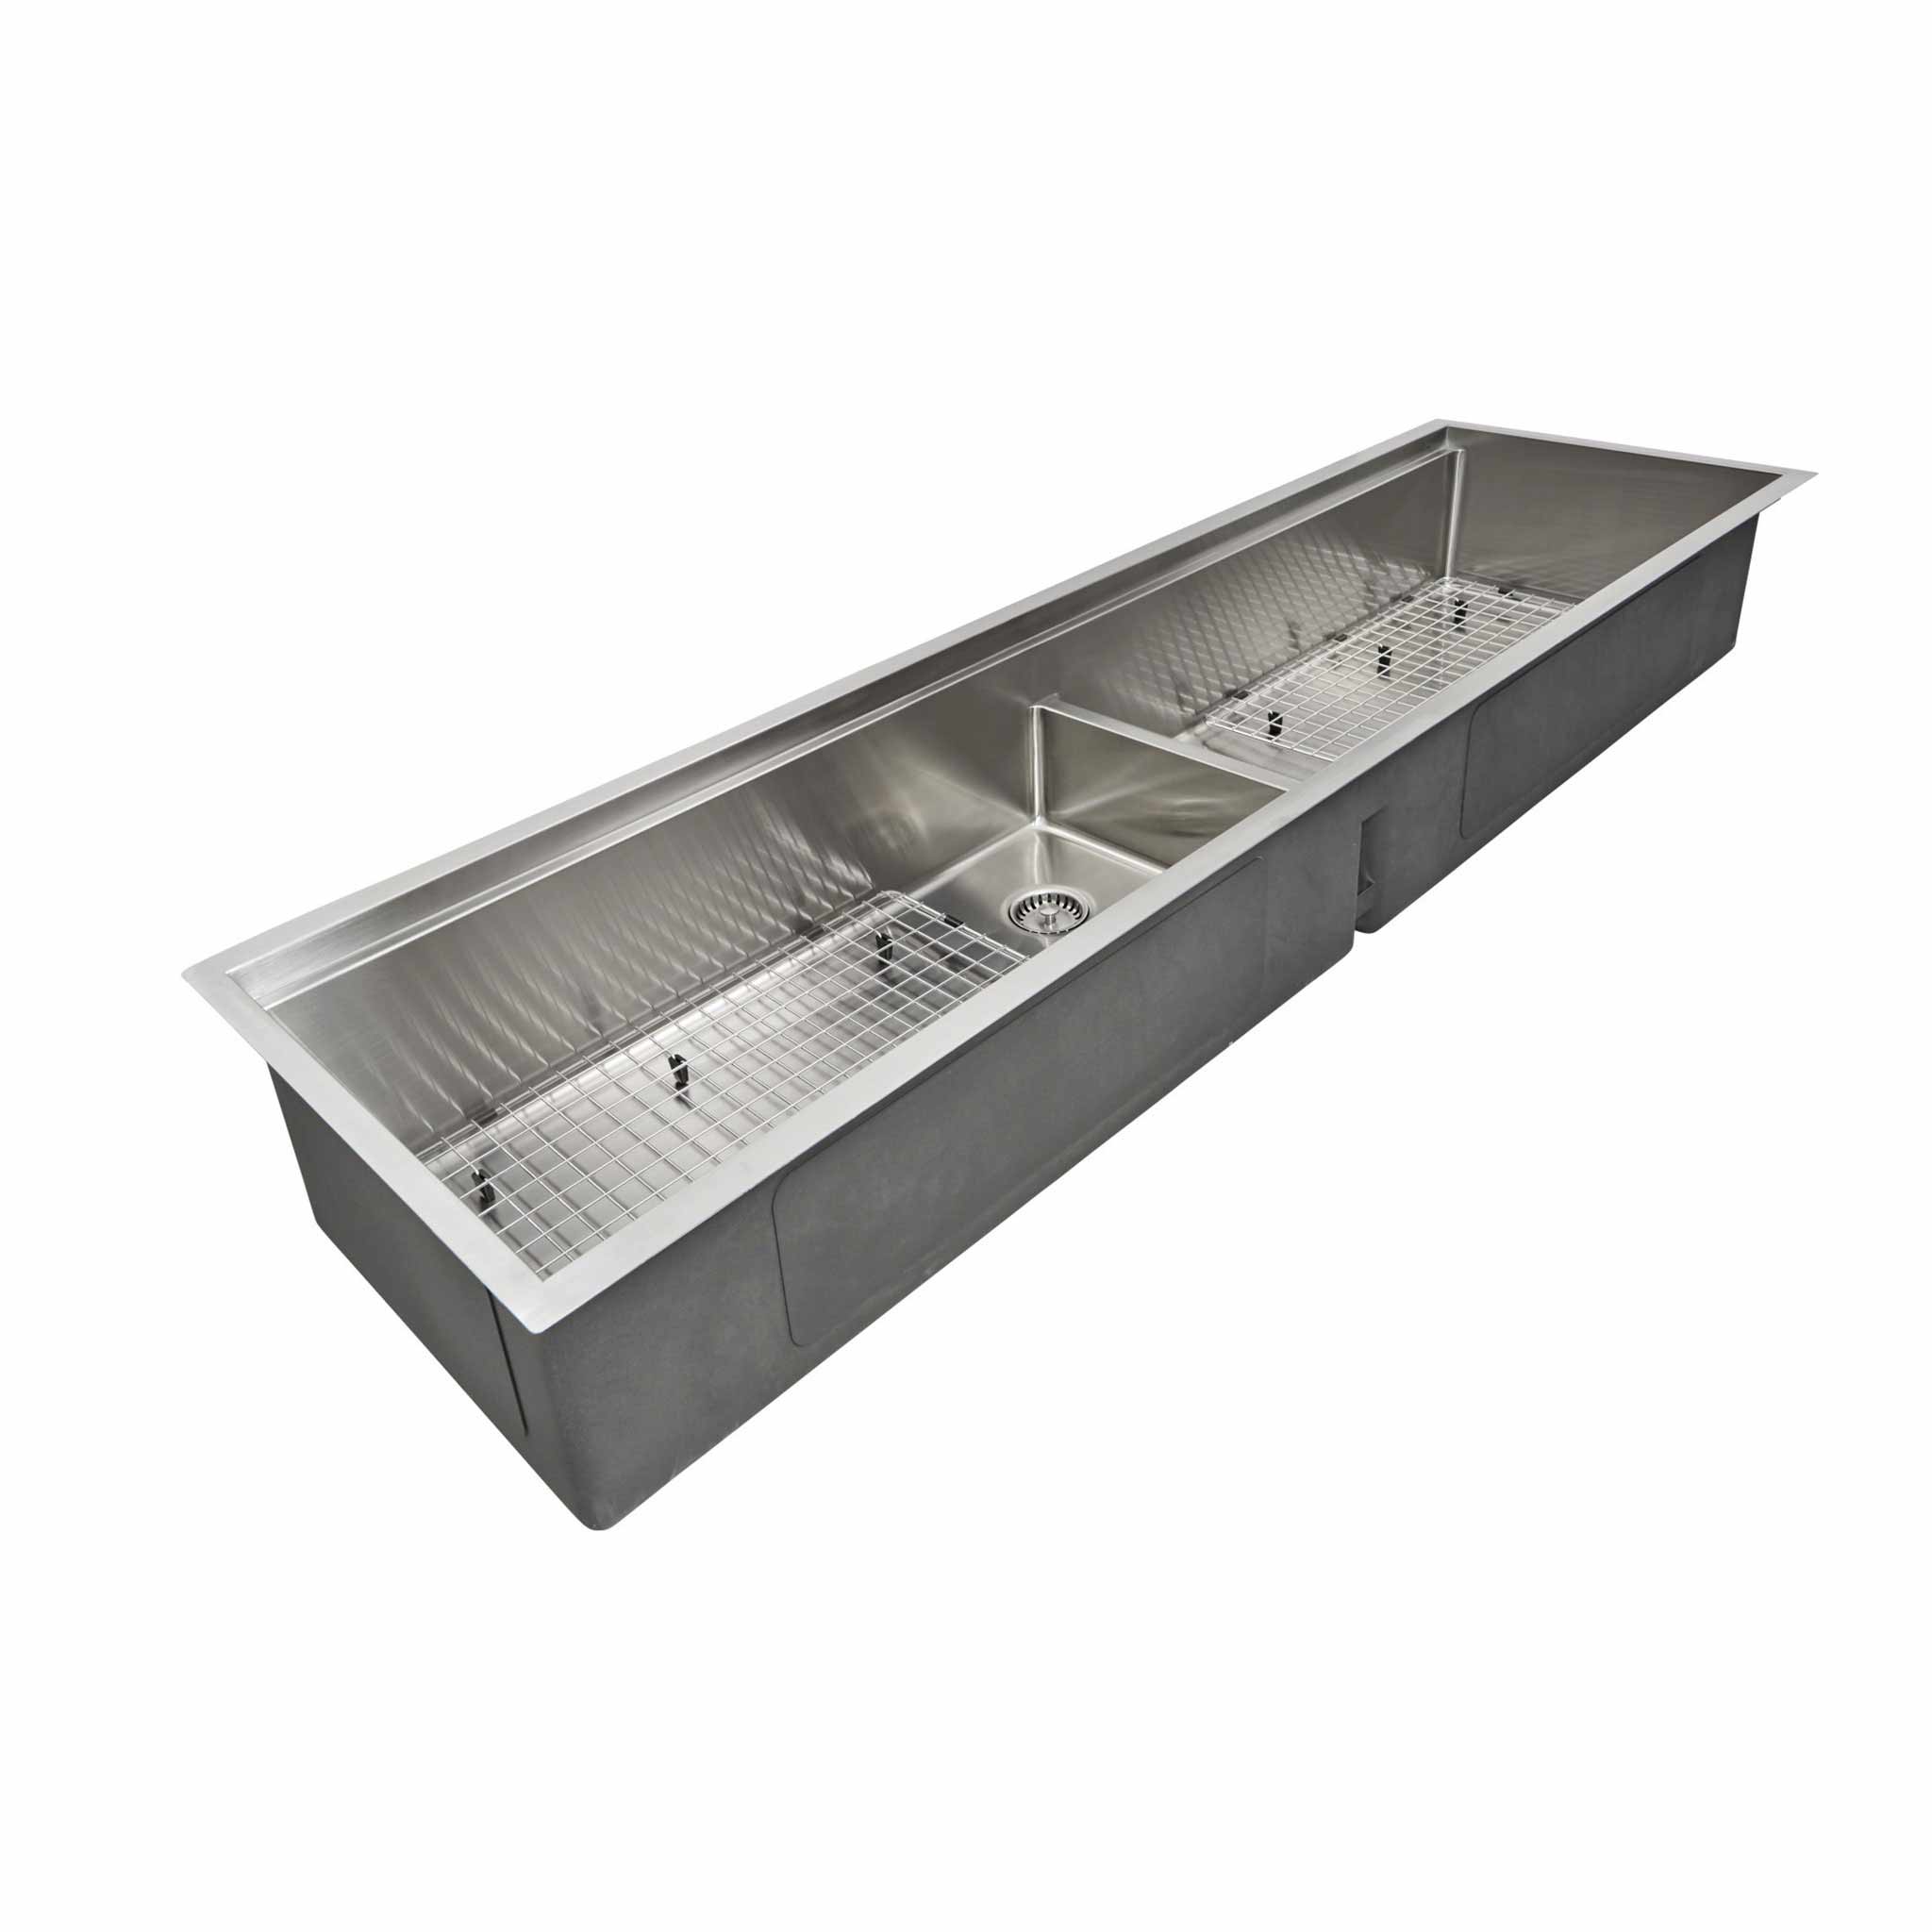 Six foot undermount double bowl workstation sink with stainless steel sink grids.